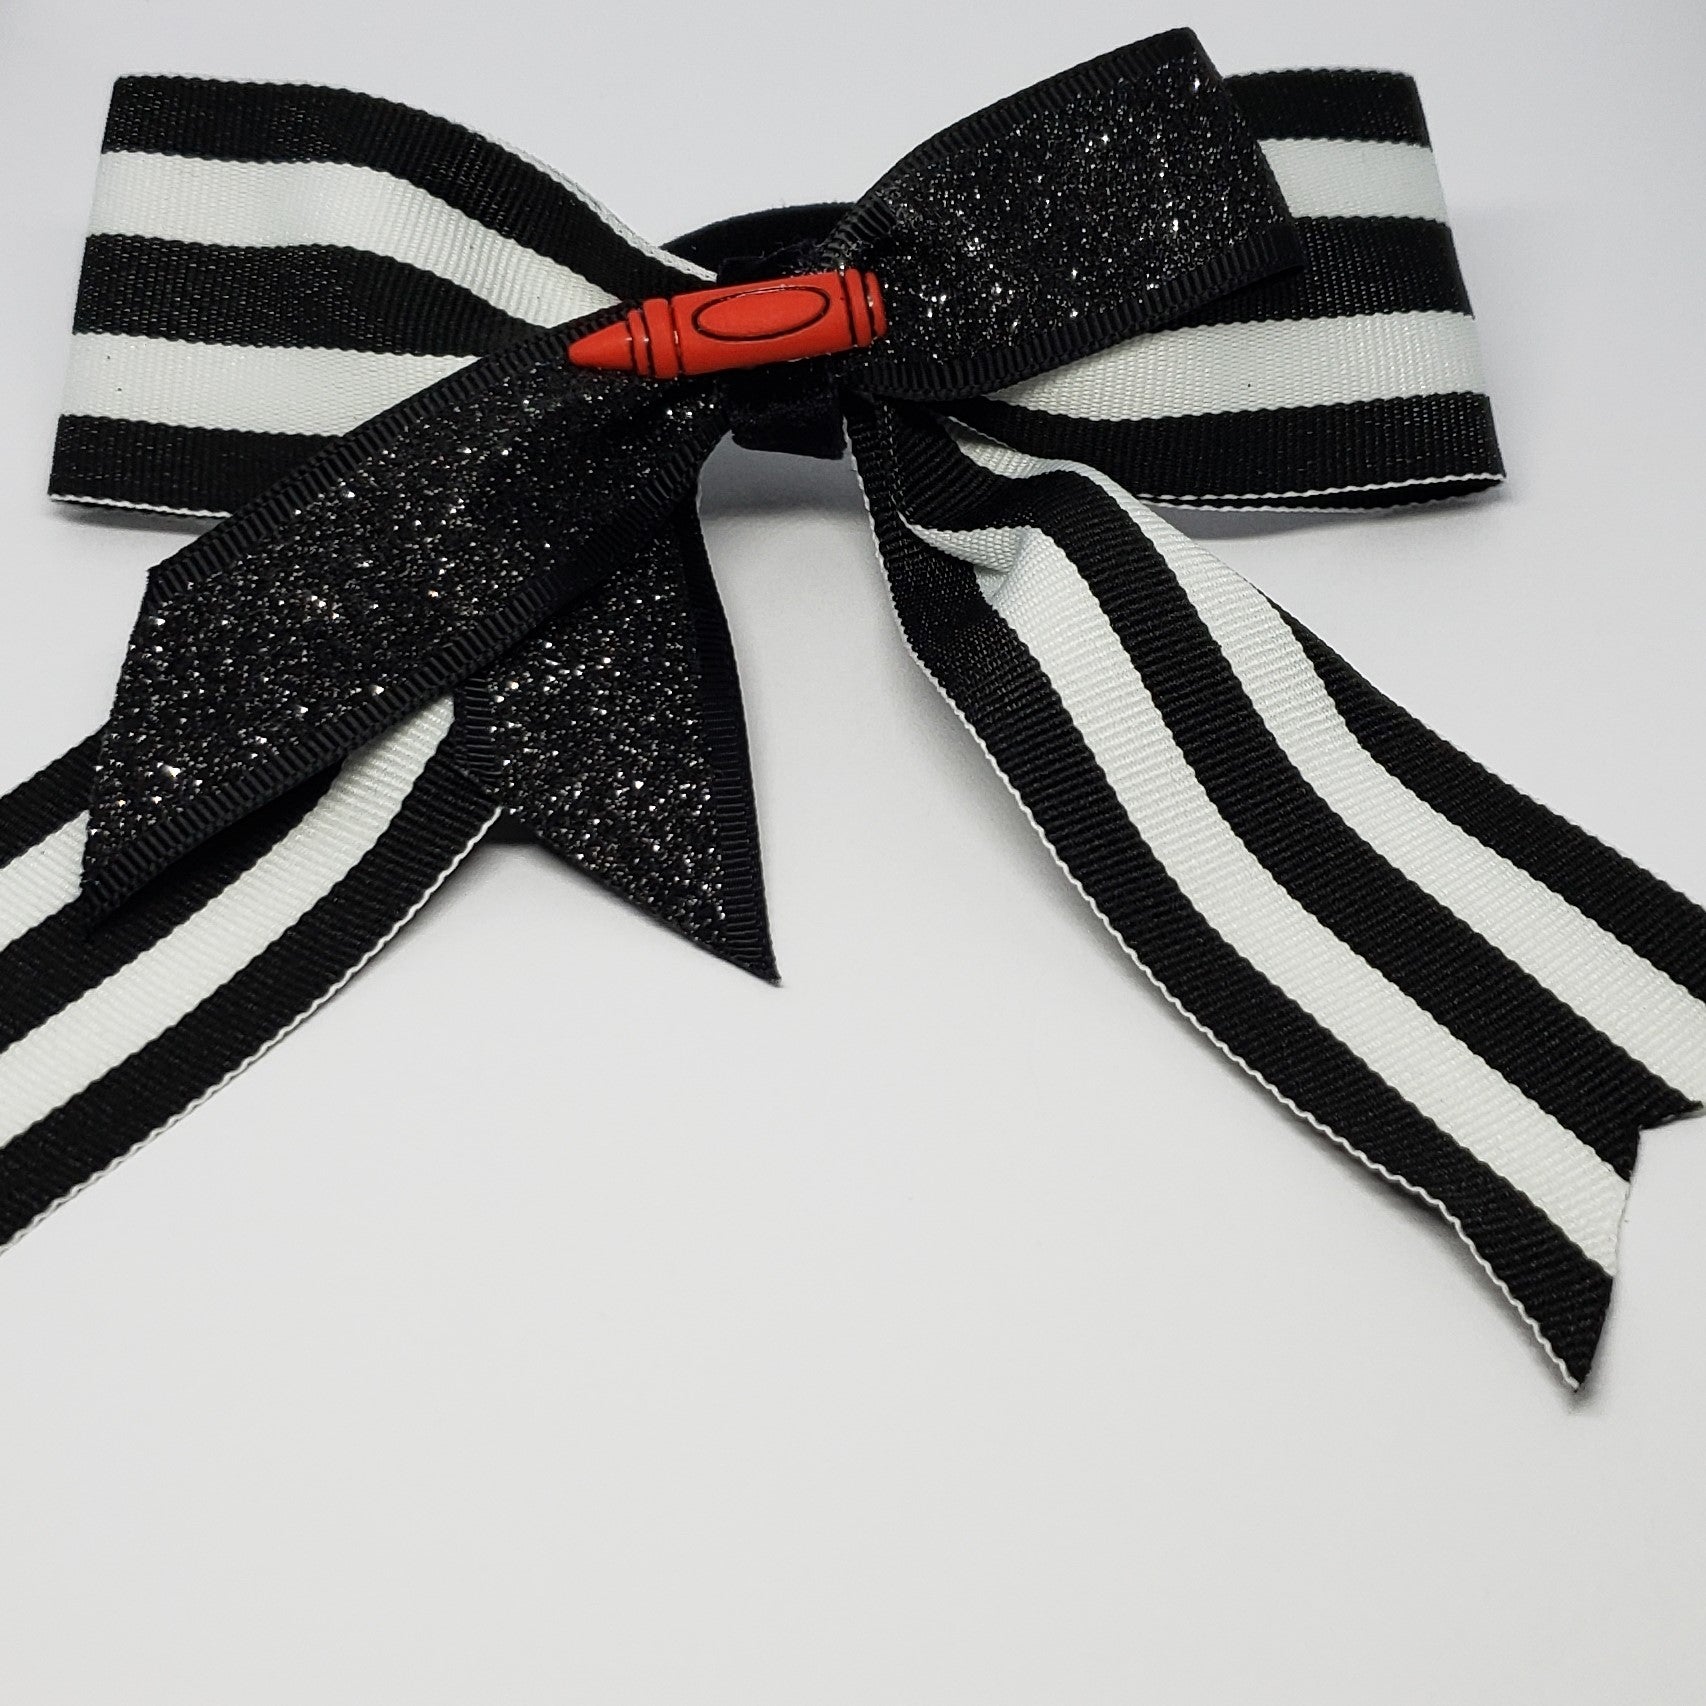 Cassidy-Dior Uniform Cheer Style Bow in Black, White & Red - Houzz of DVA Boutique